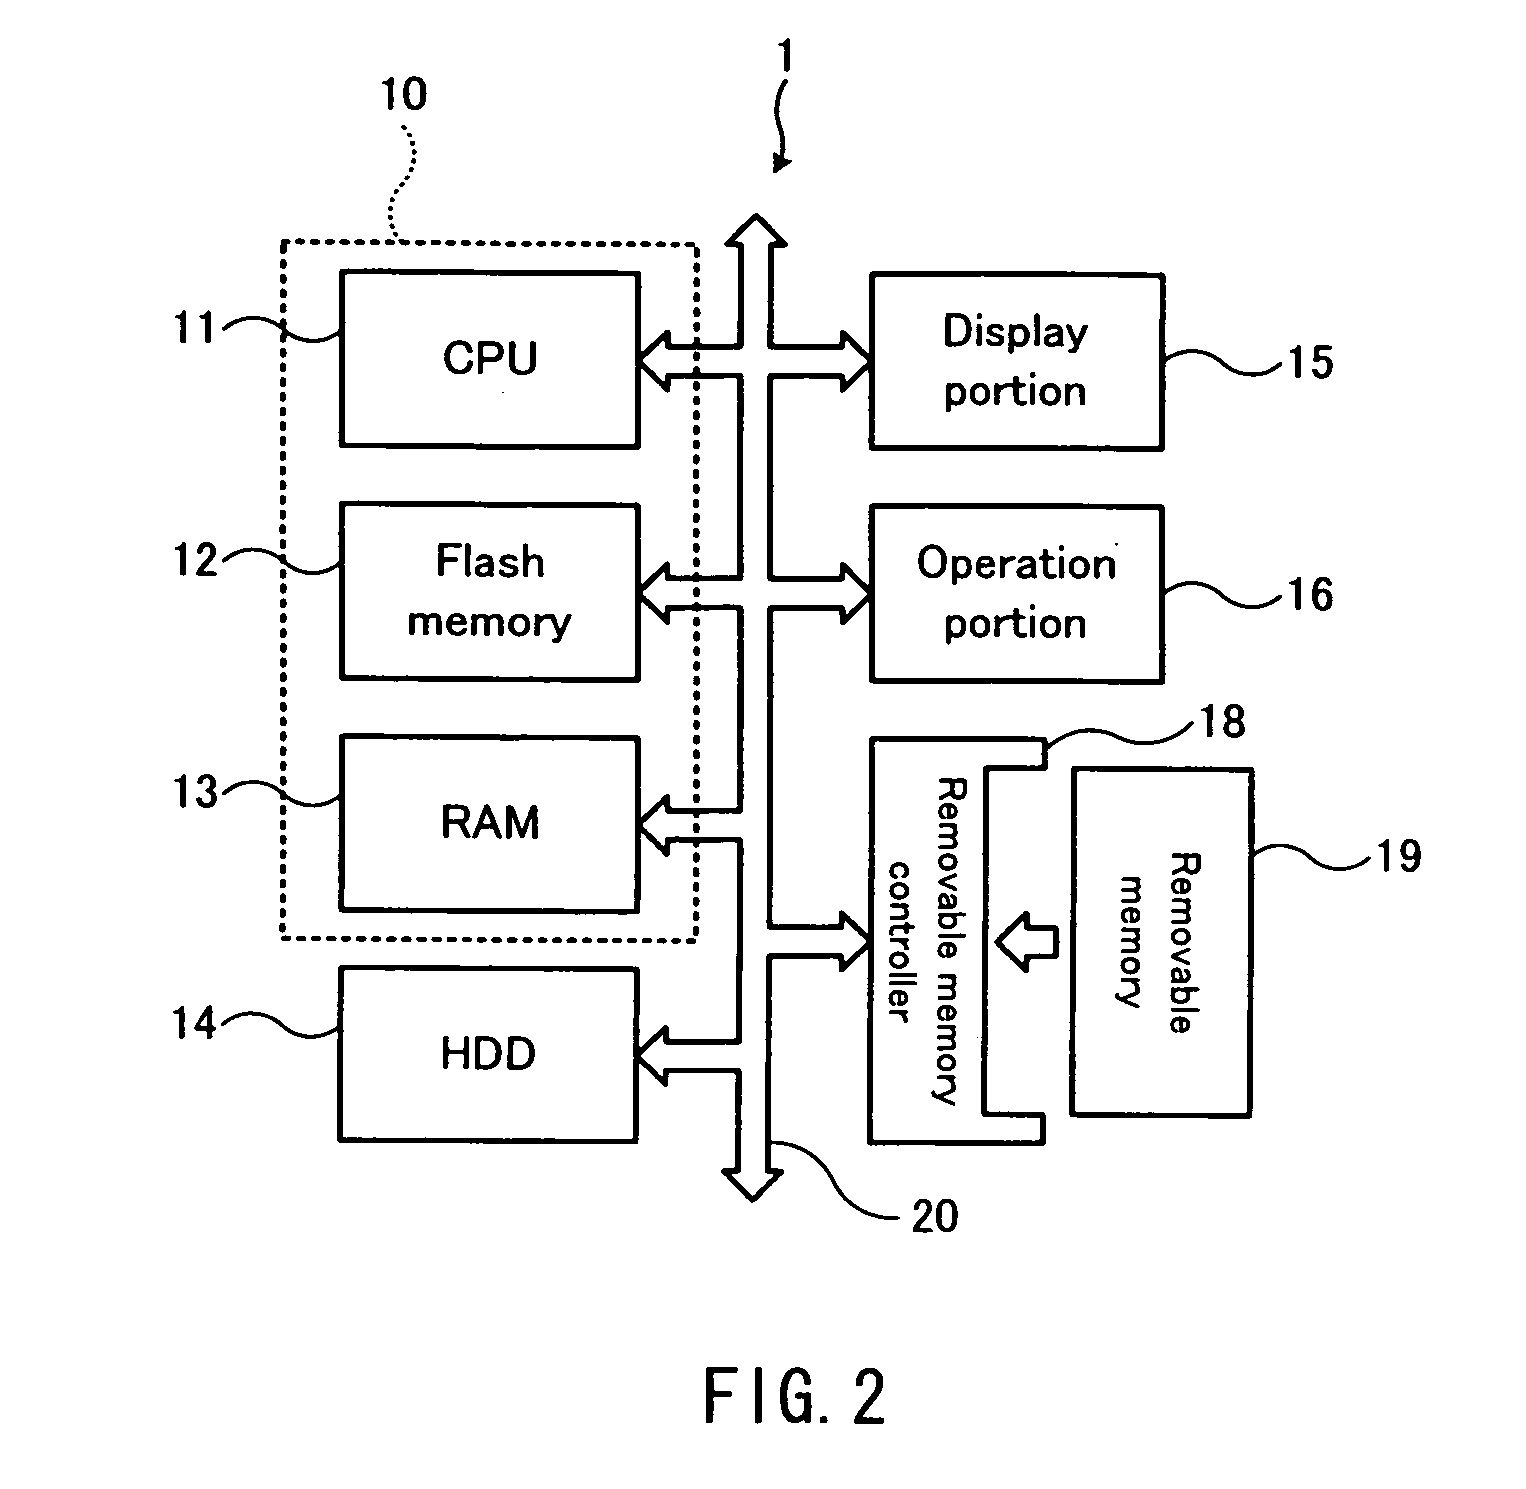 Apparatus for displaying an image